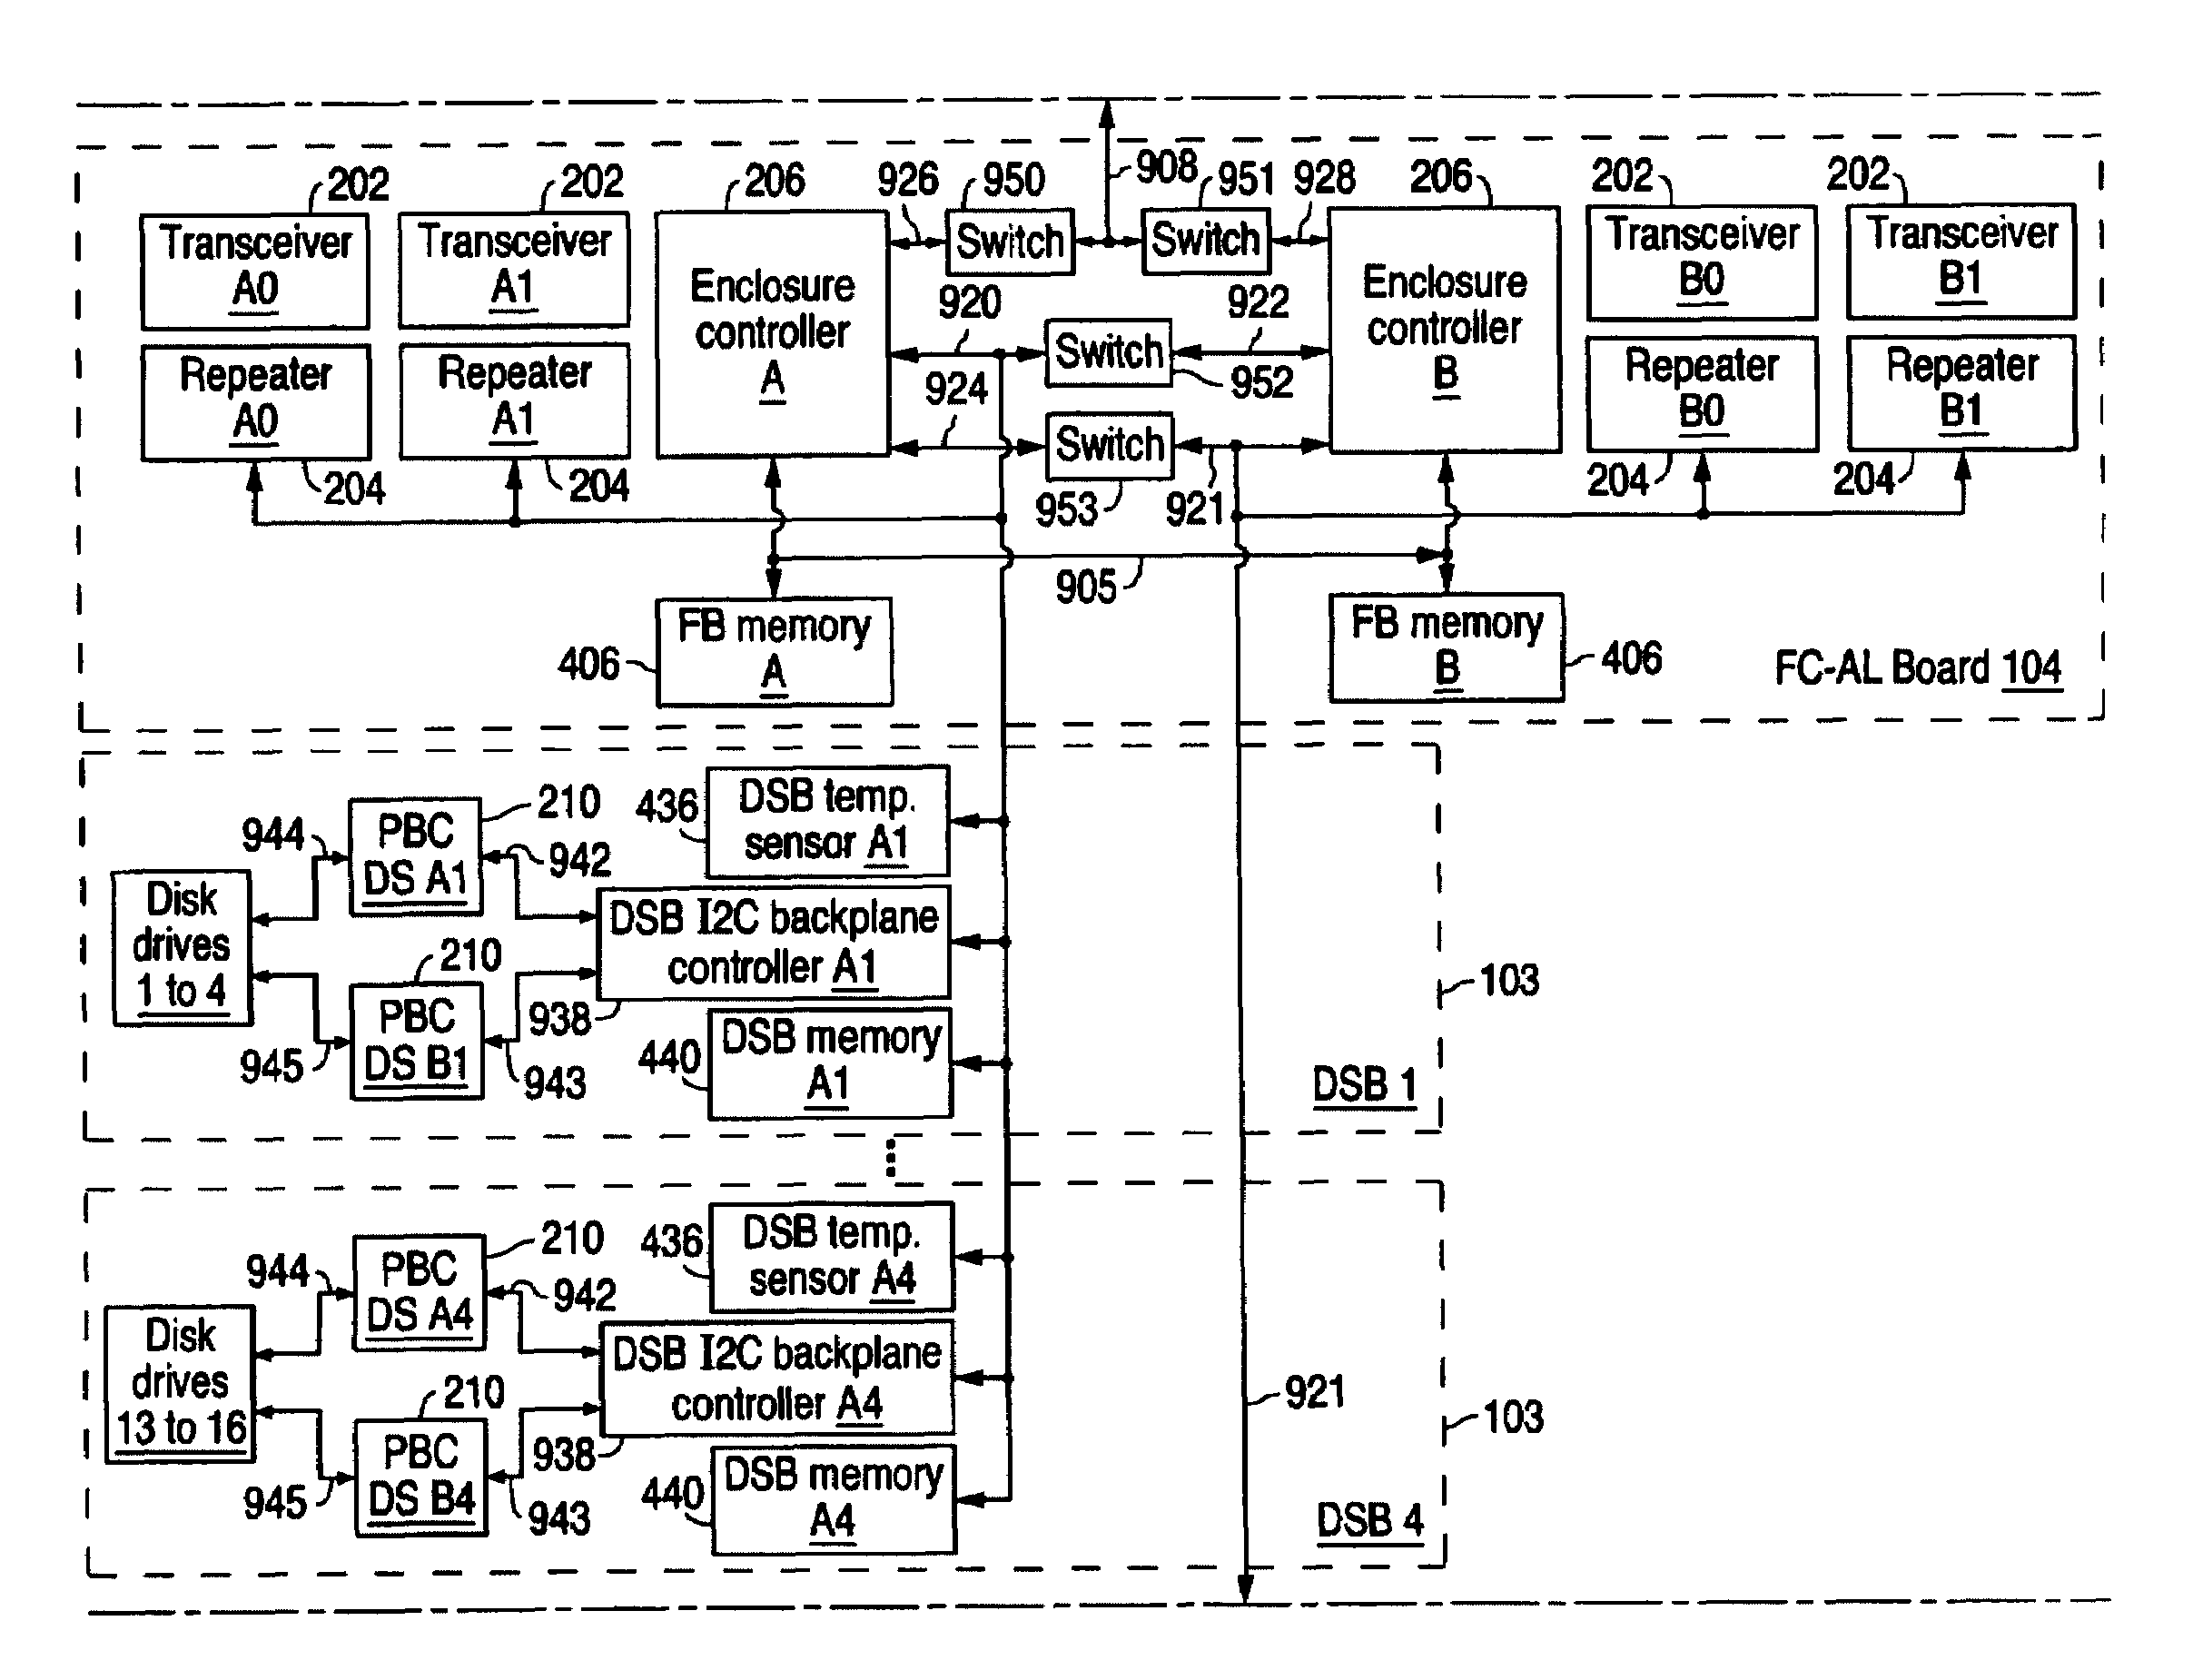 Disk enclosure with multiplexers for connecting 12C buses in multiple power domains